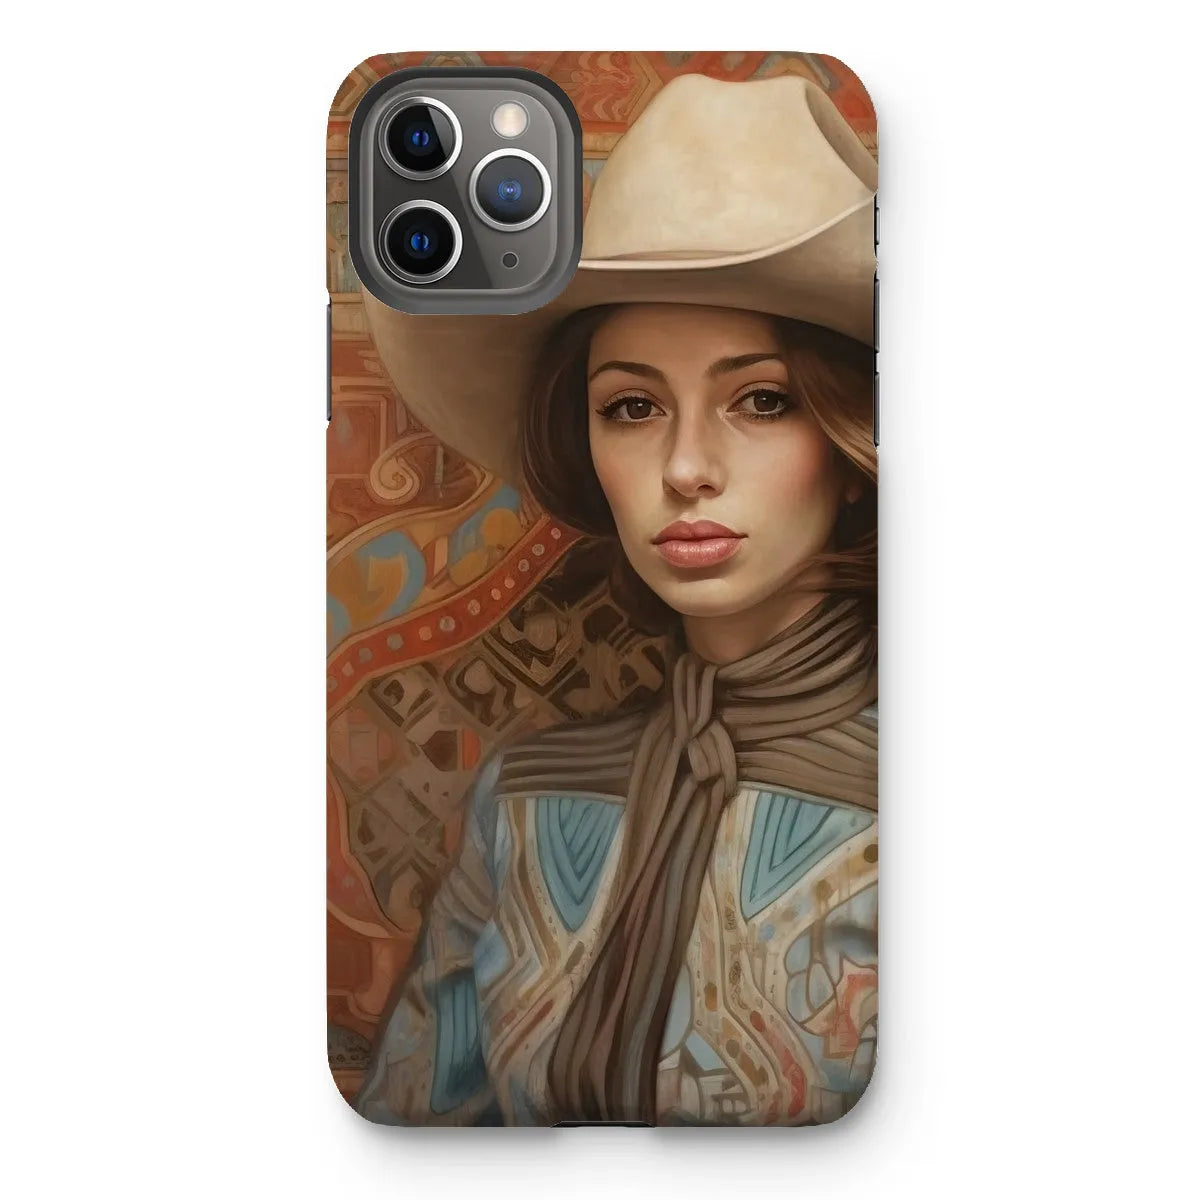 Anahita The Lesbian Cowgirl - Sapphic Art Phone Case - Iphone 11 Pro Max / Matte - Mobile Phone Cases - Aesthetic Art